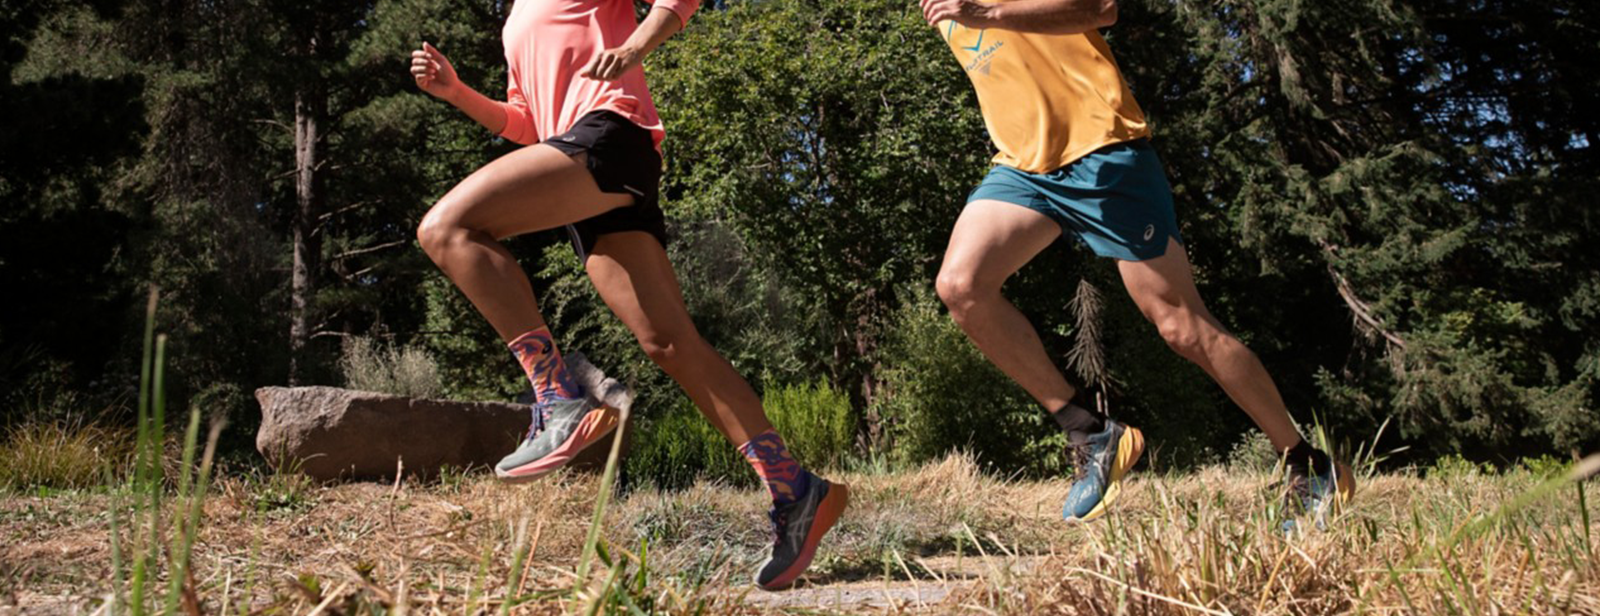 How to Choose the Best Trail Running Shoes for You | ASICS